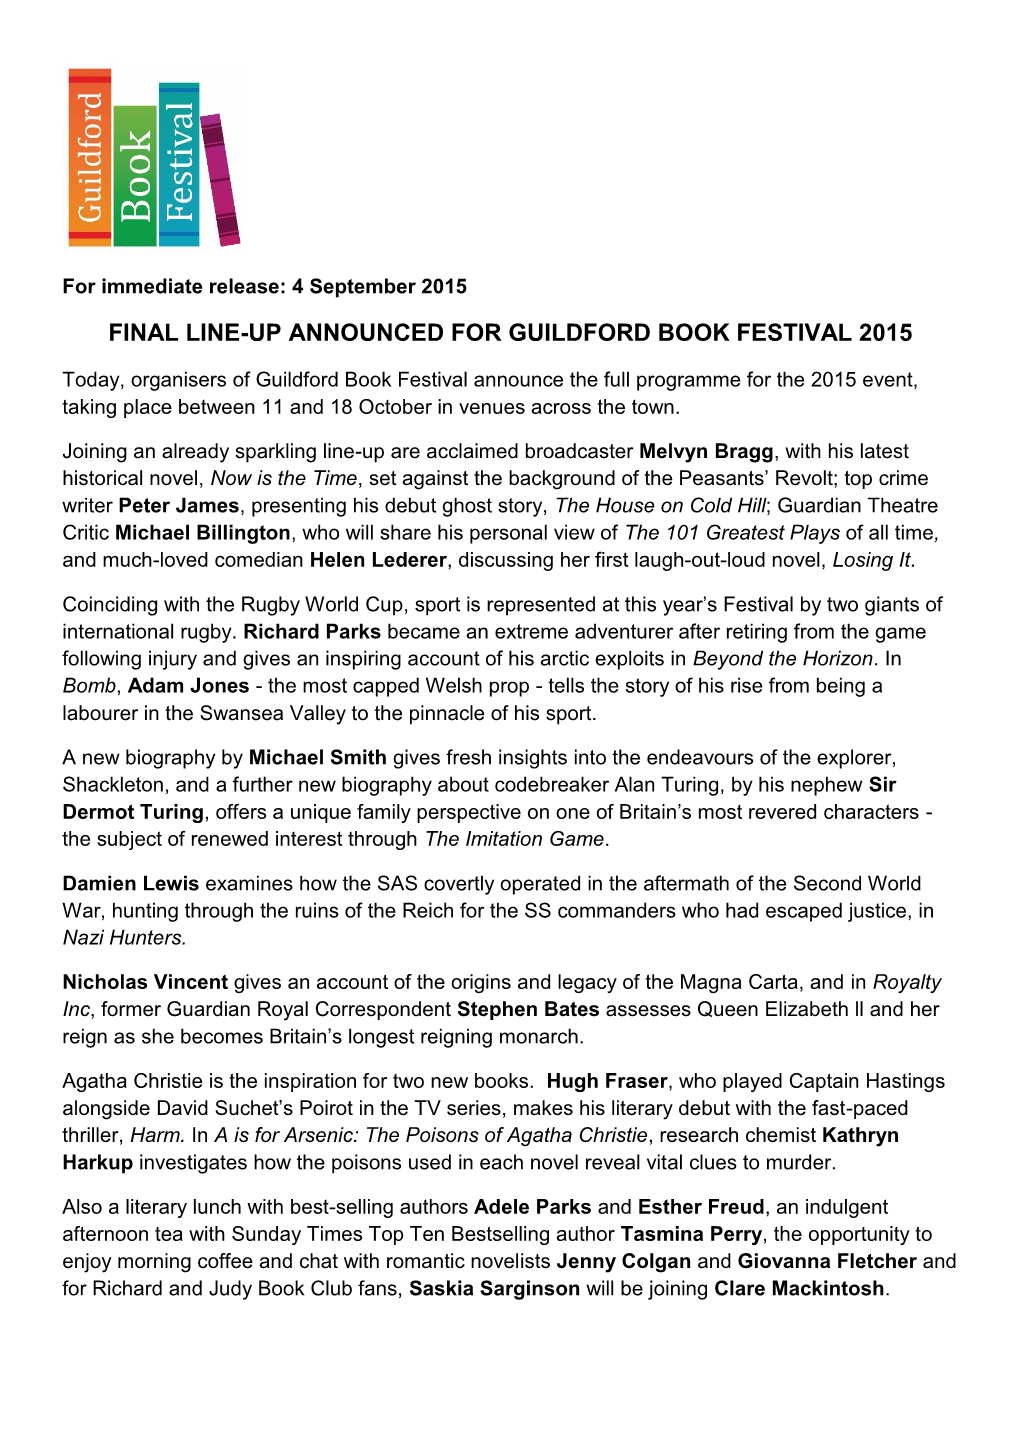 Final Line-Up Announced for Guildford Book Festival 2015